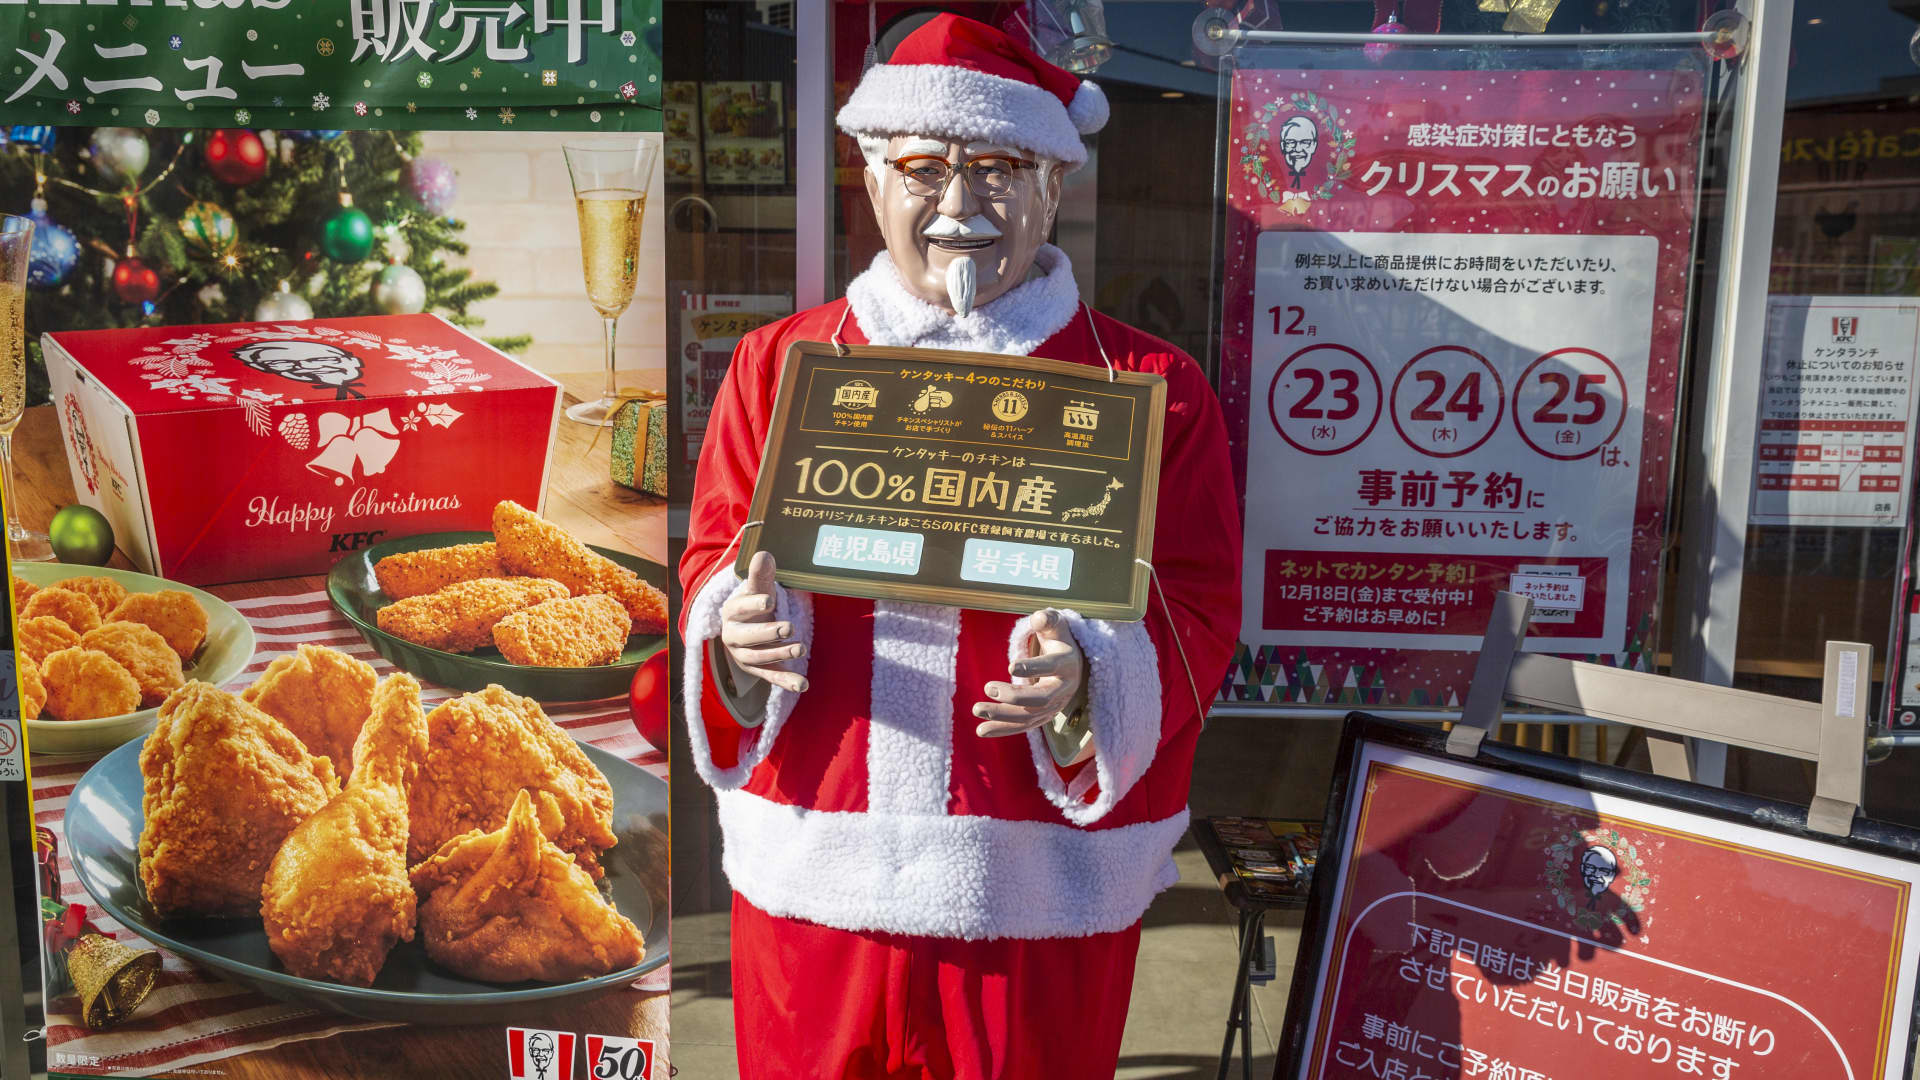 One theory behind Japan's custom of eating KFC on Christmas is that it was a foreigner's food of choice for the holiday since turkey wasn't available. This inspired the company to market it as a Christmas food, a KFC Japan representative told CNBC.